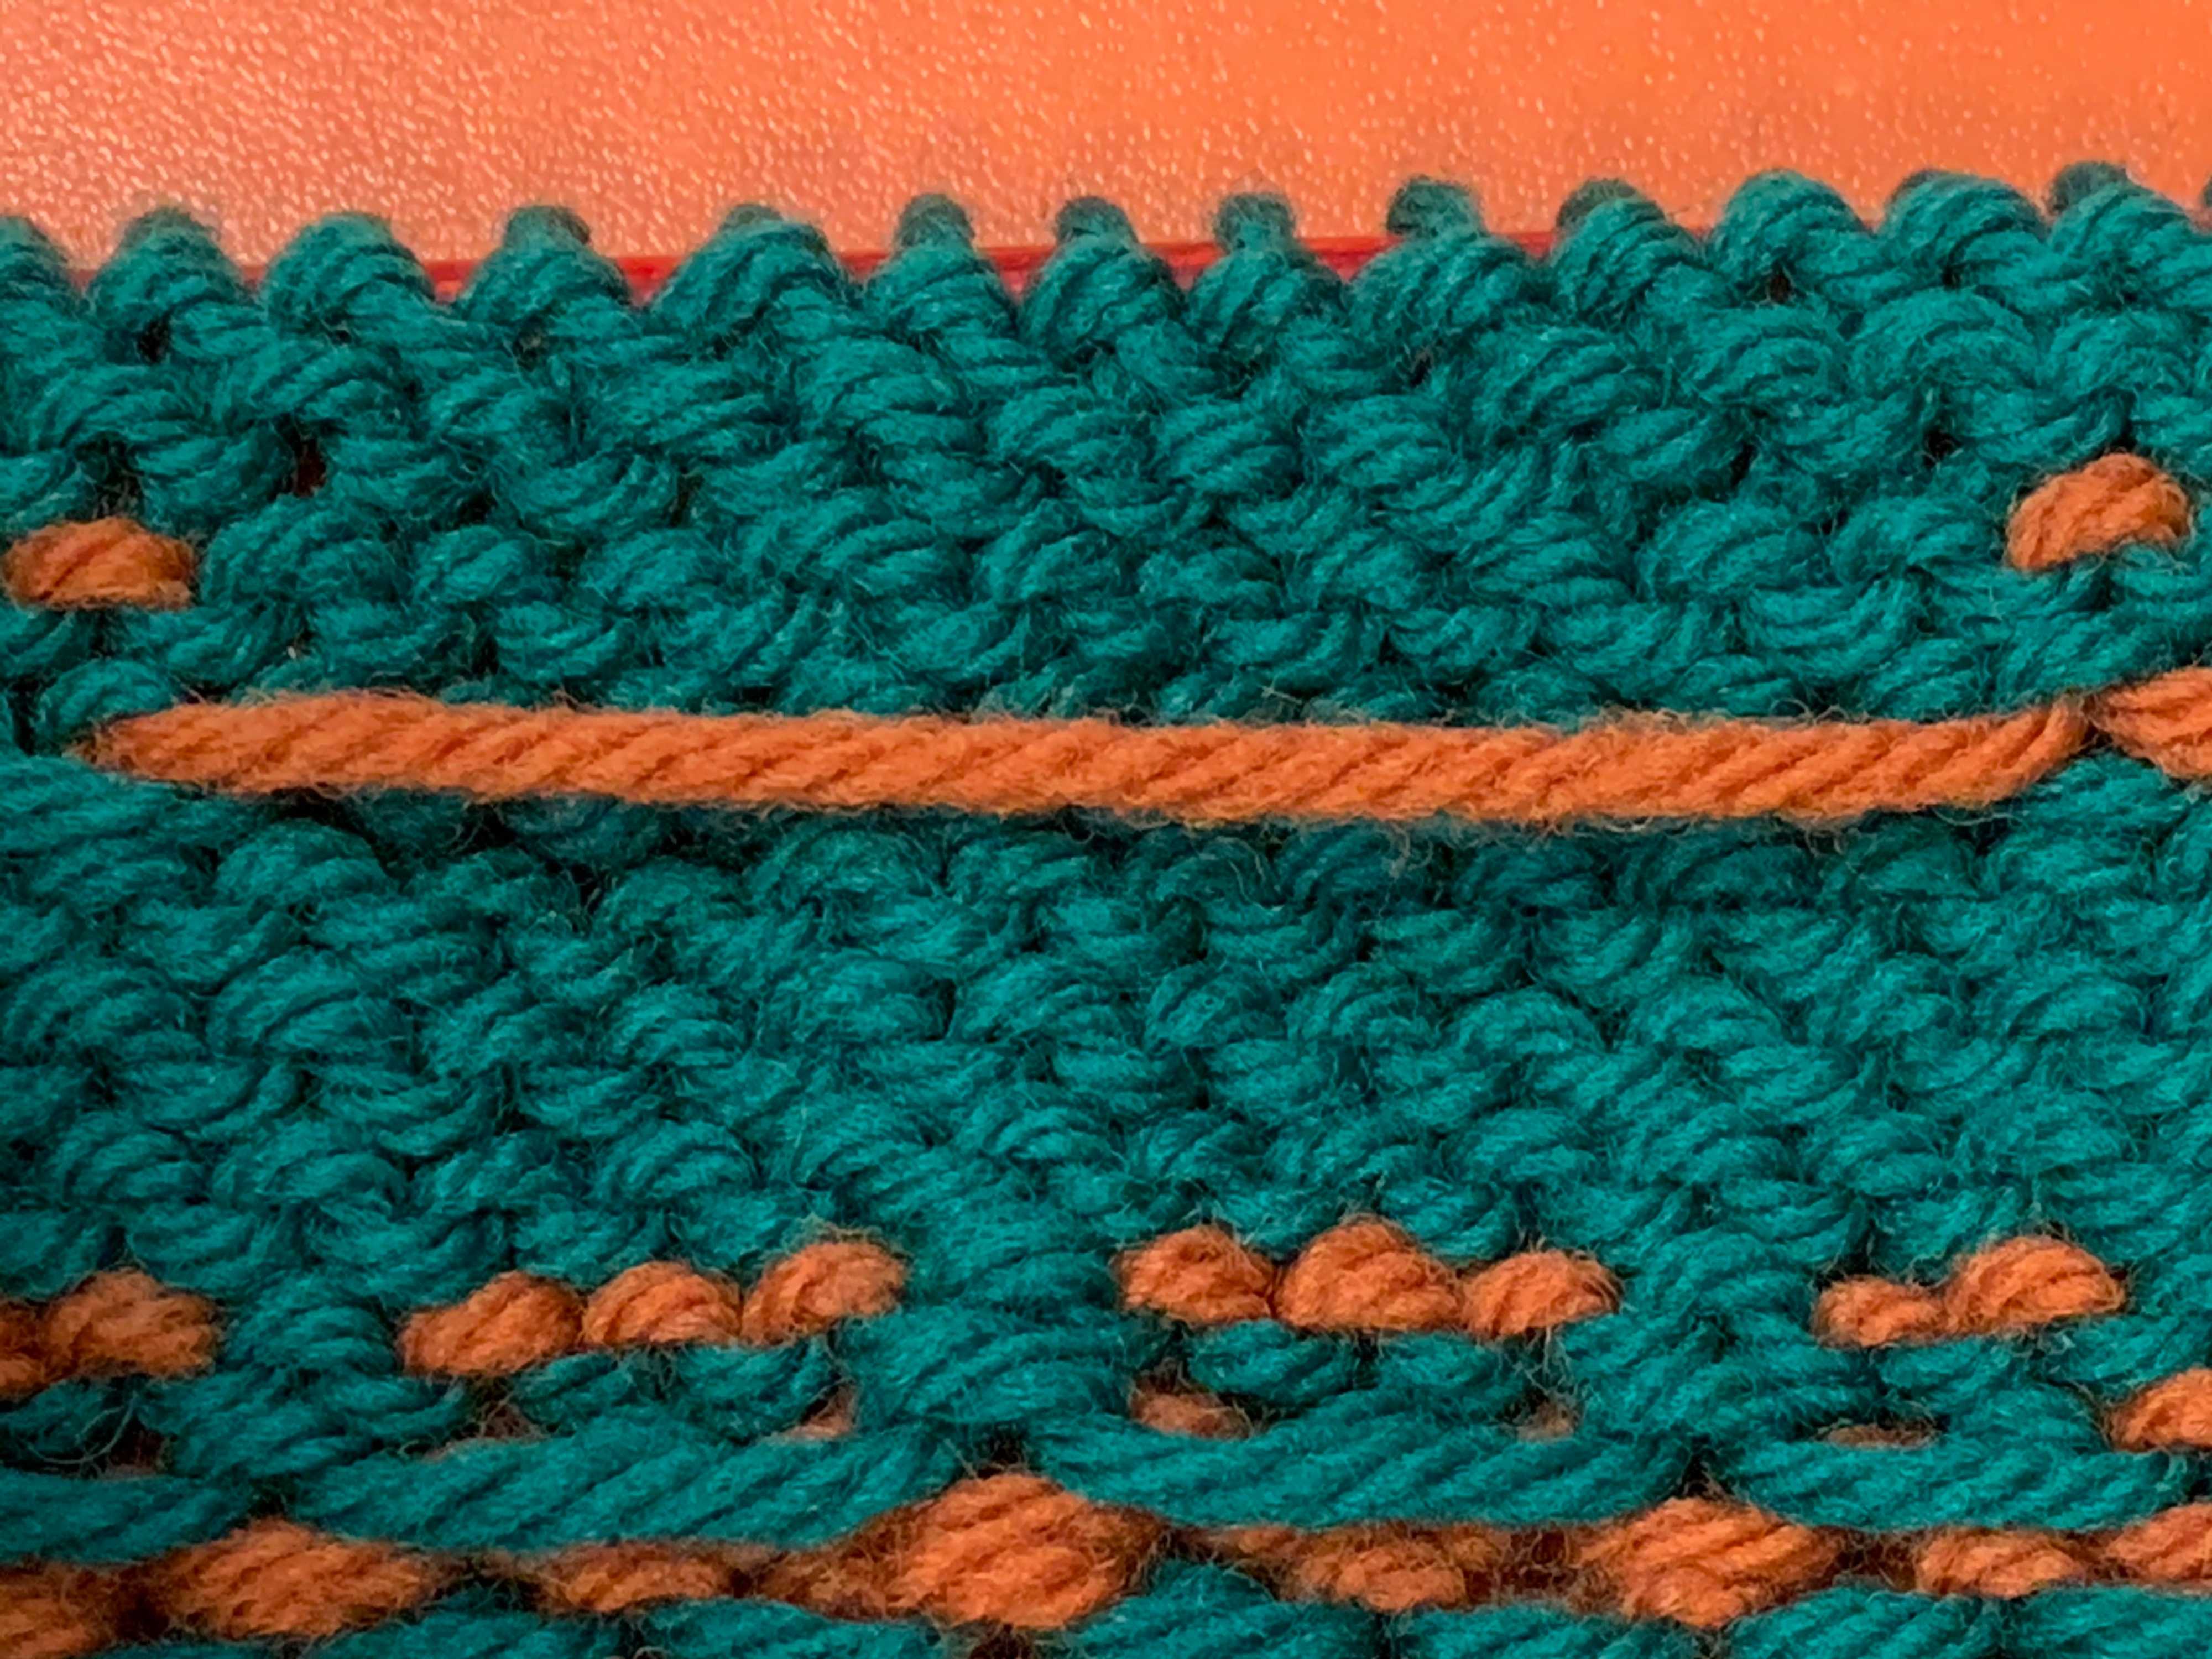 A long float of orange yarn which has not been secured.